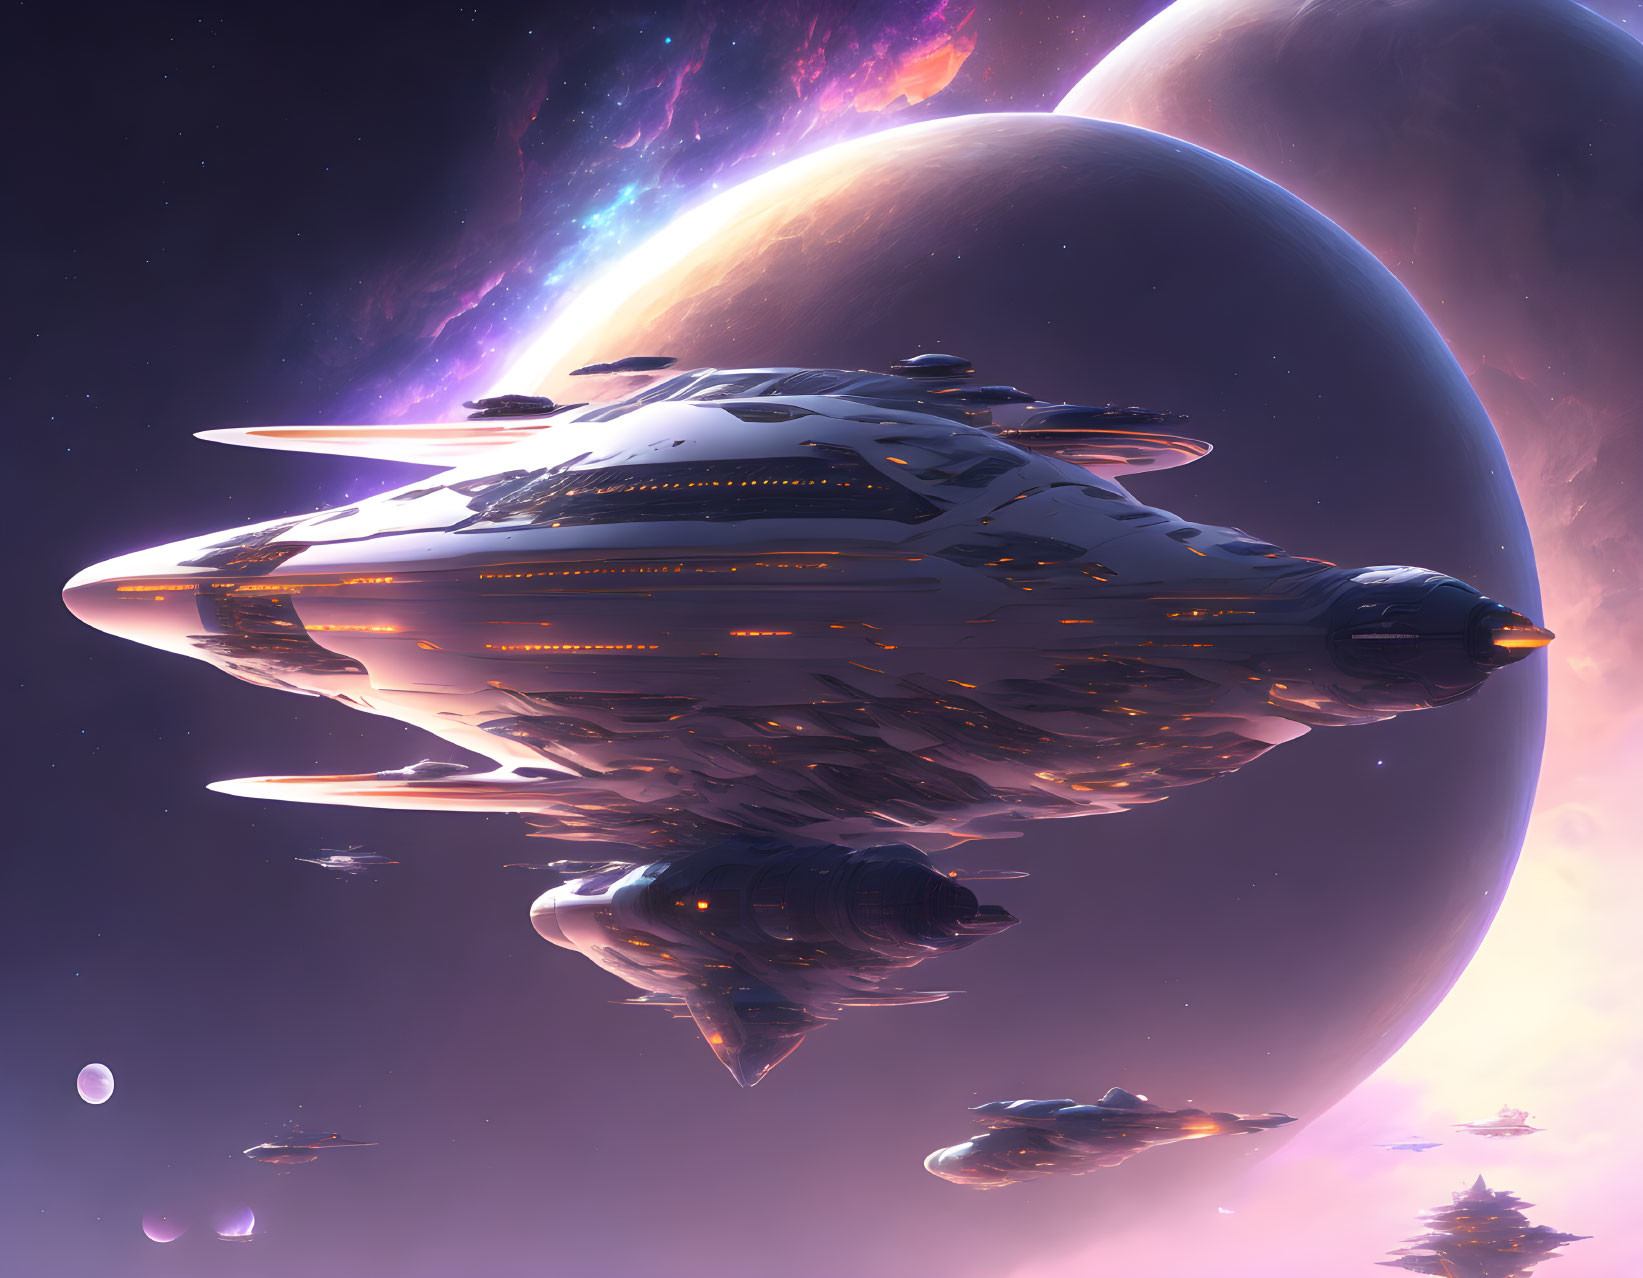 Futuristic spaceship in space with planets and nebulas